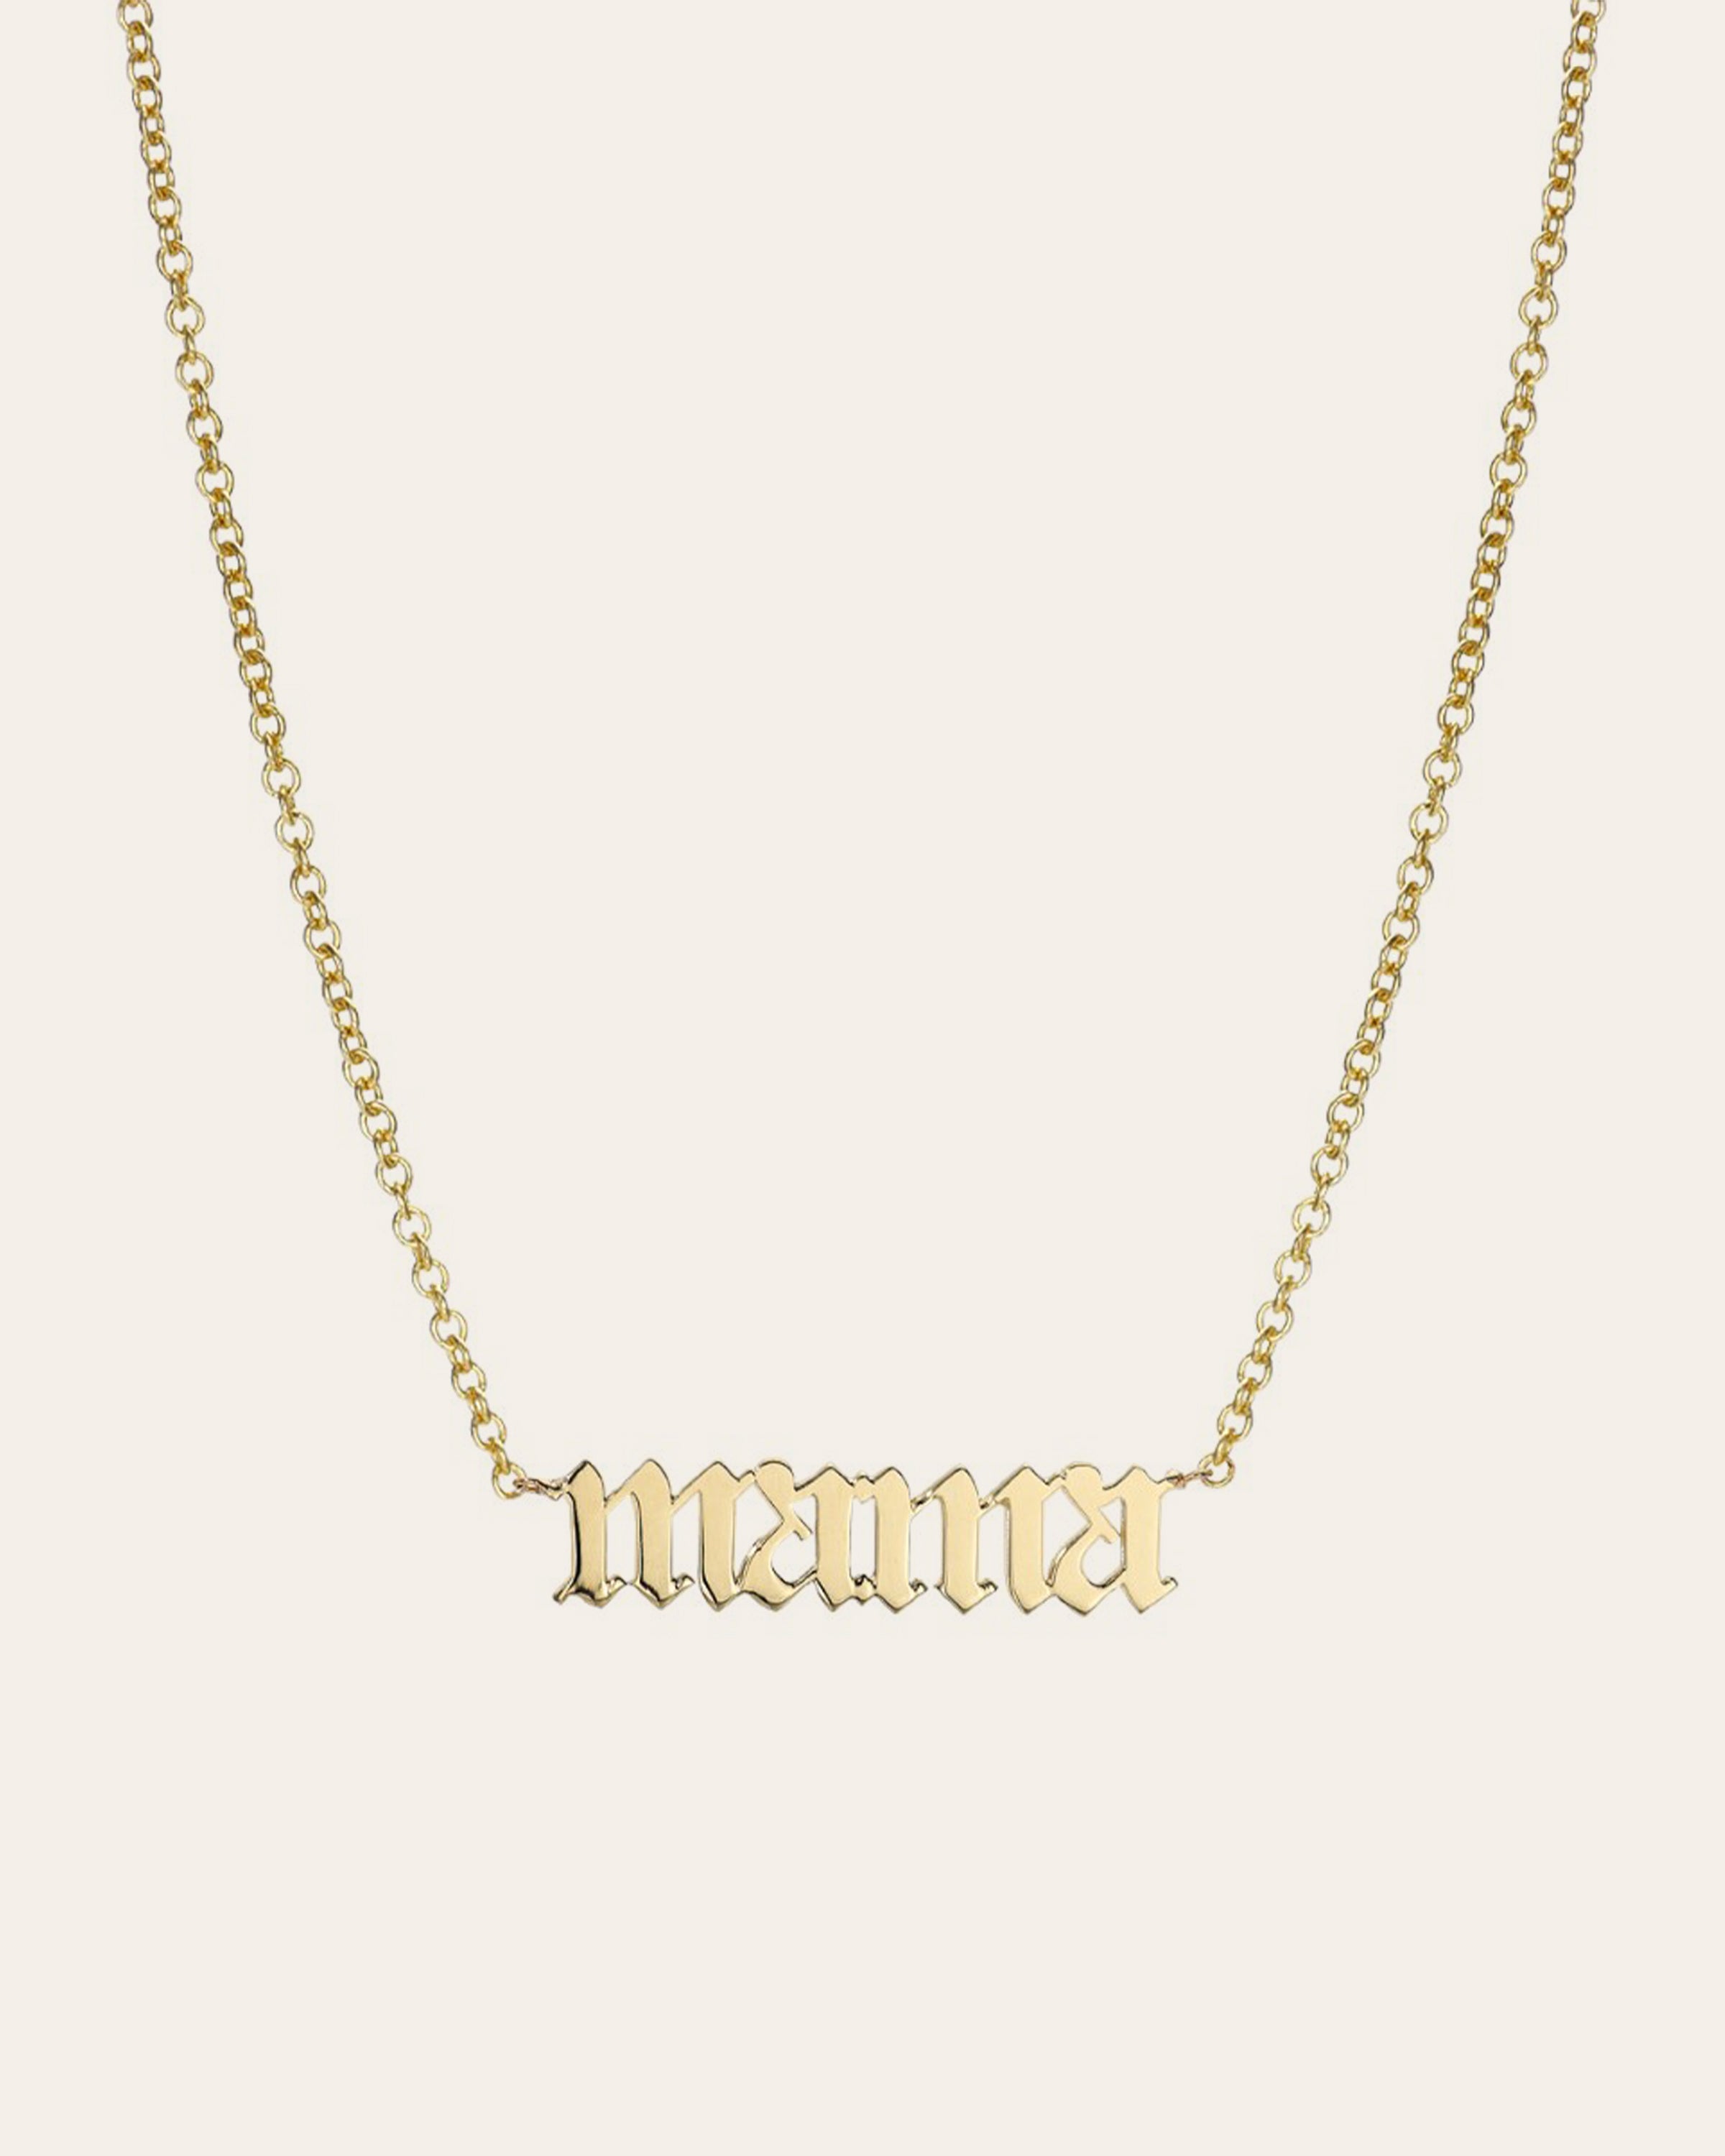 Gothic necklace Old English font necklace gold custom necklace initial  necklace personalized necklace Gothic necklaces for women